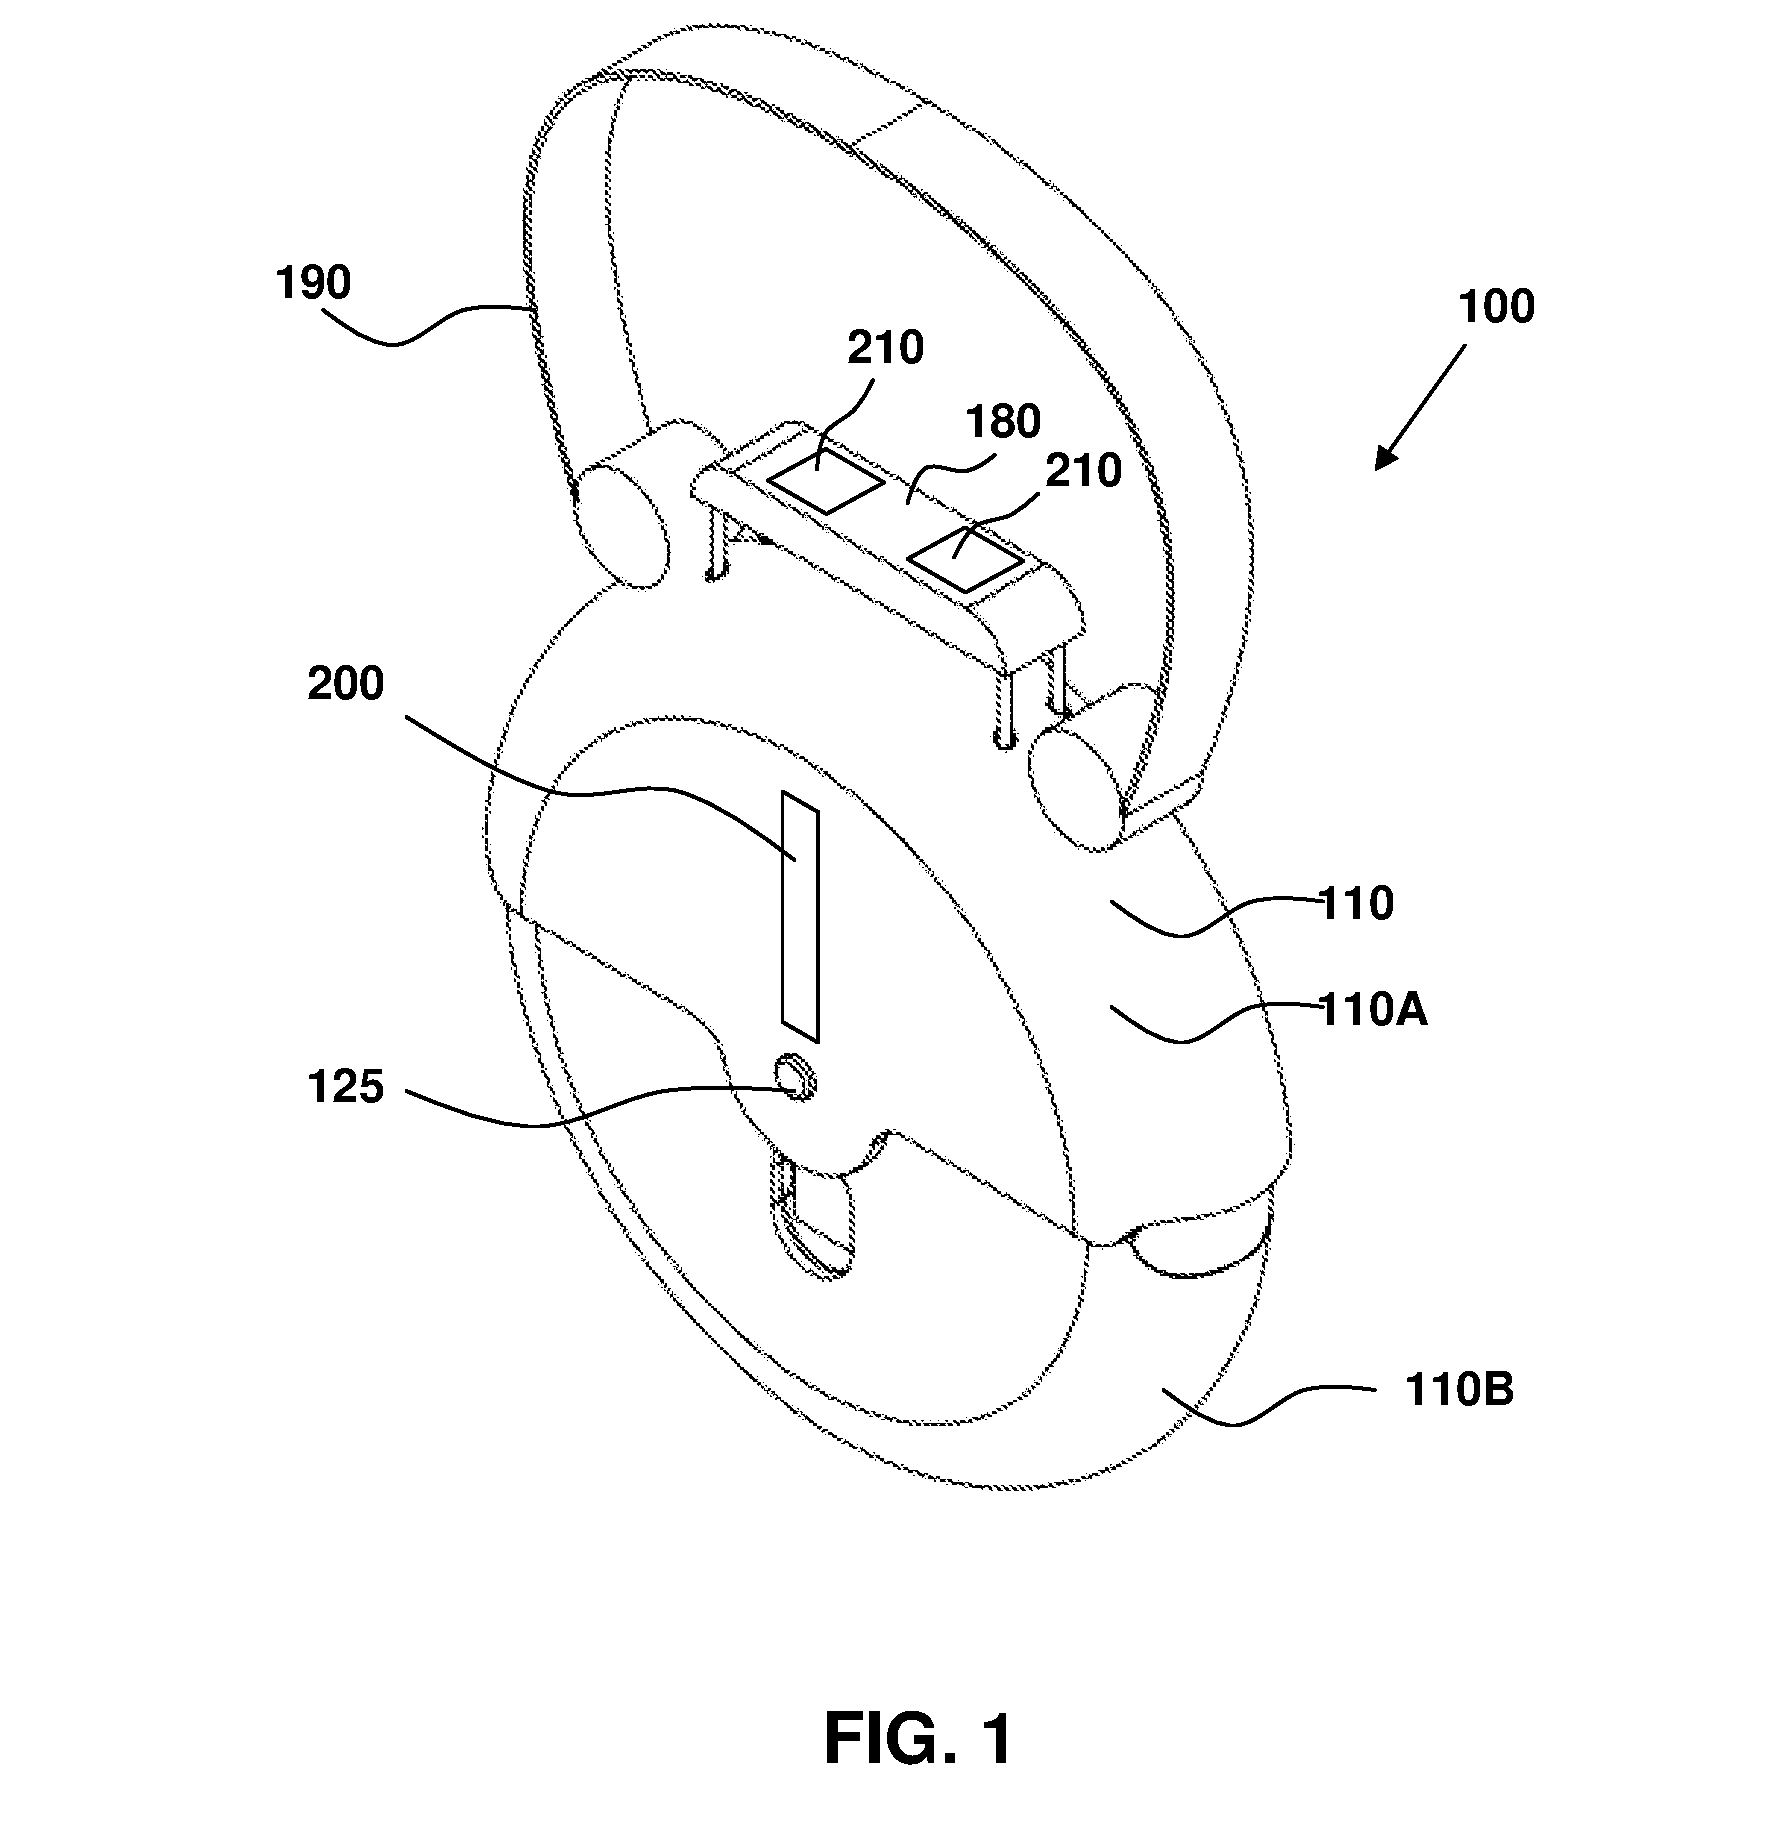 Usage detection system for a self-balancing powered unicycle device